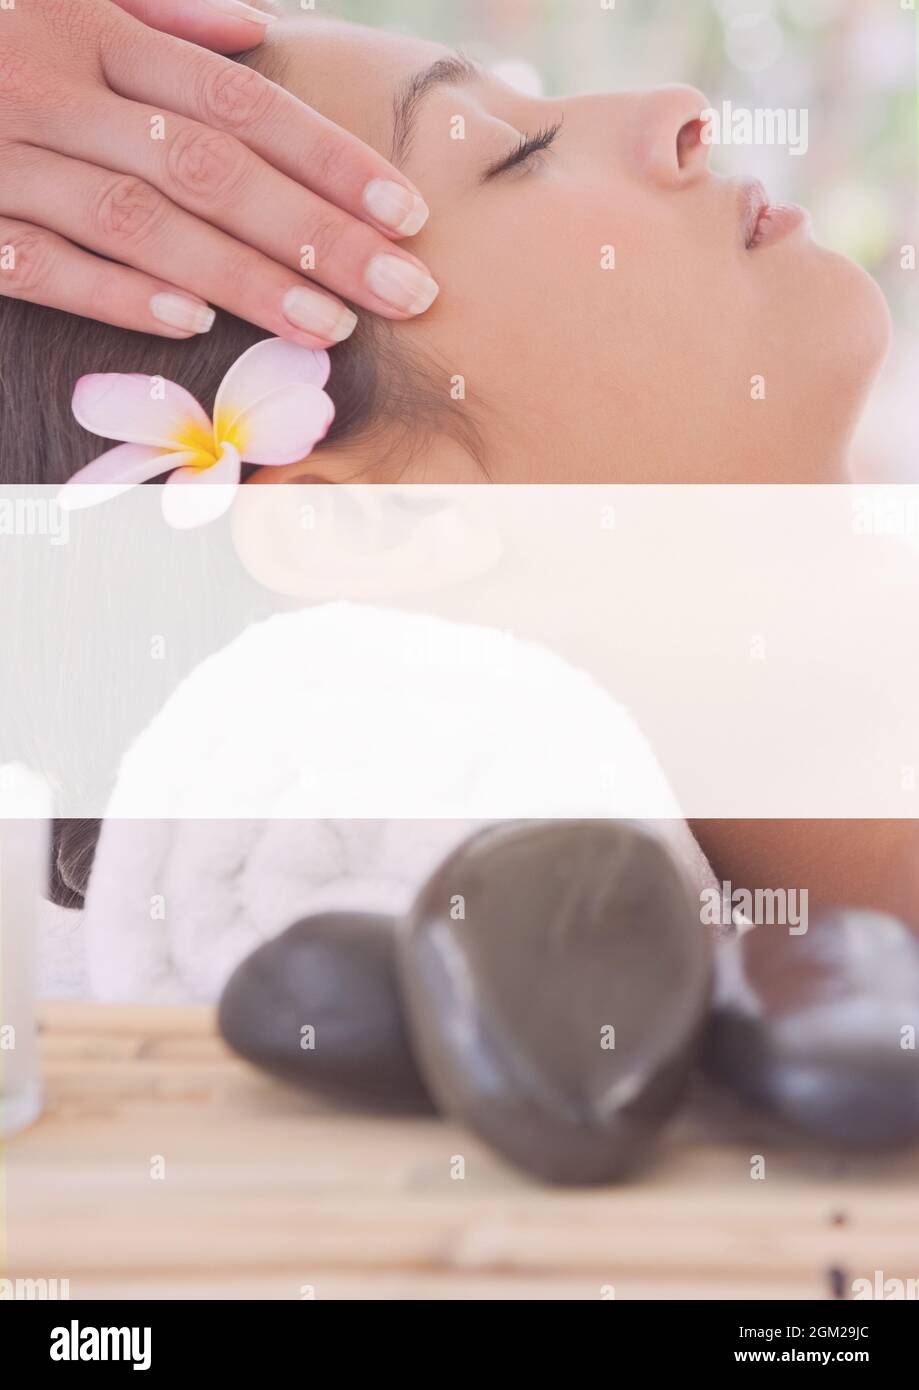 White banner with copy space against close up of a woman receiving a head massage Stock Photo